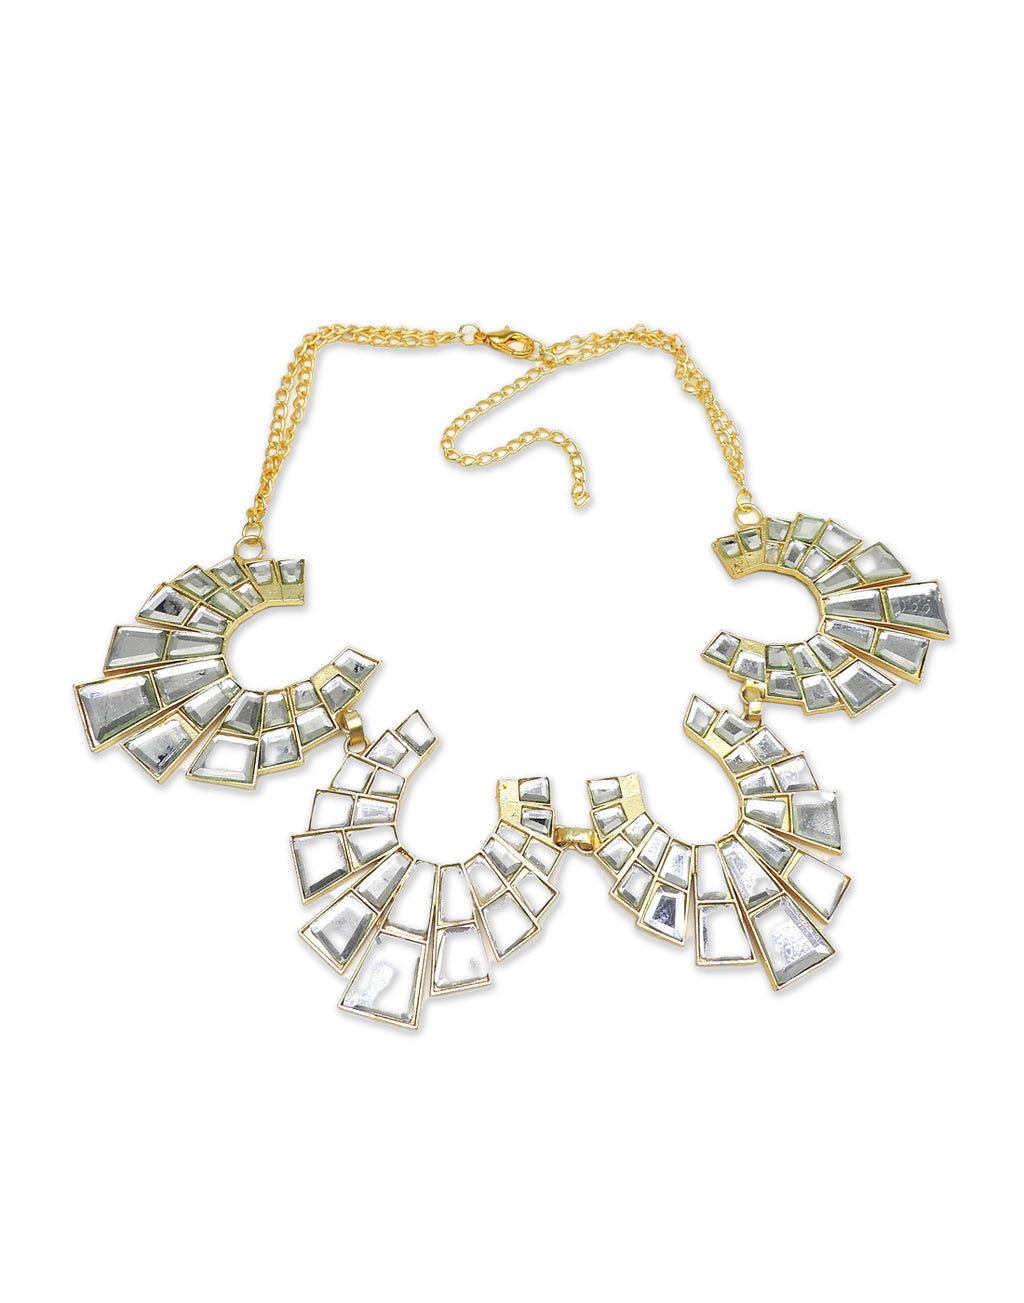 Crystal Cascade Necklace - Statement Necklaces - Gold-Plated & Hypoallergenic Jewellery - Made in India - Dubai Jewellery - Dori